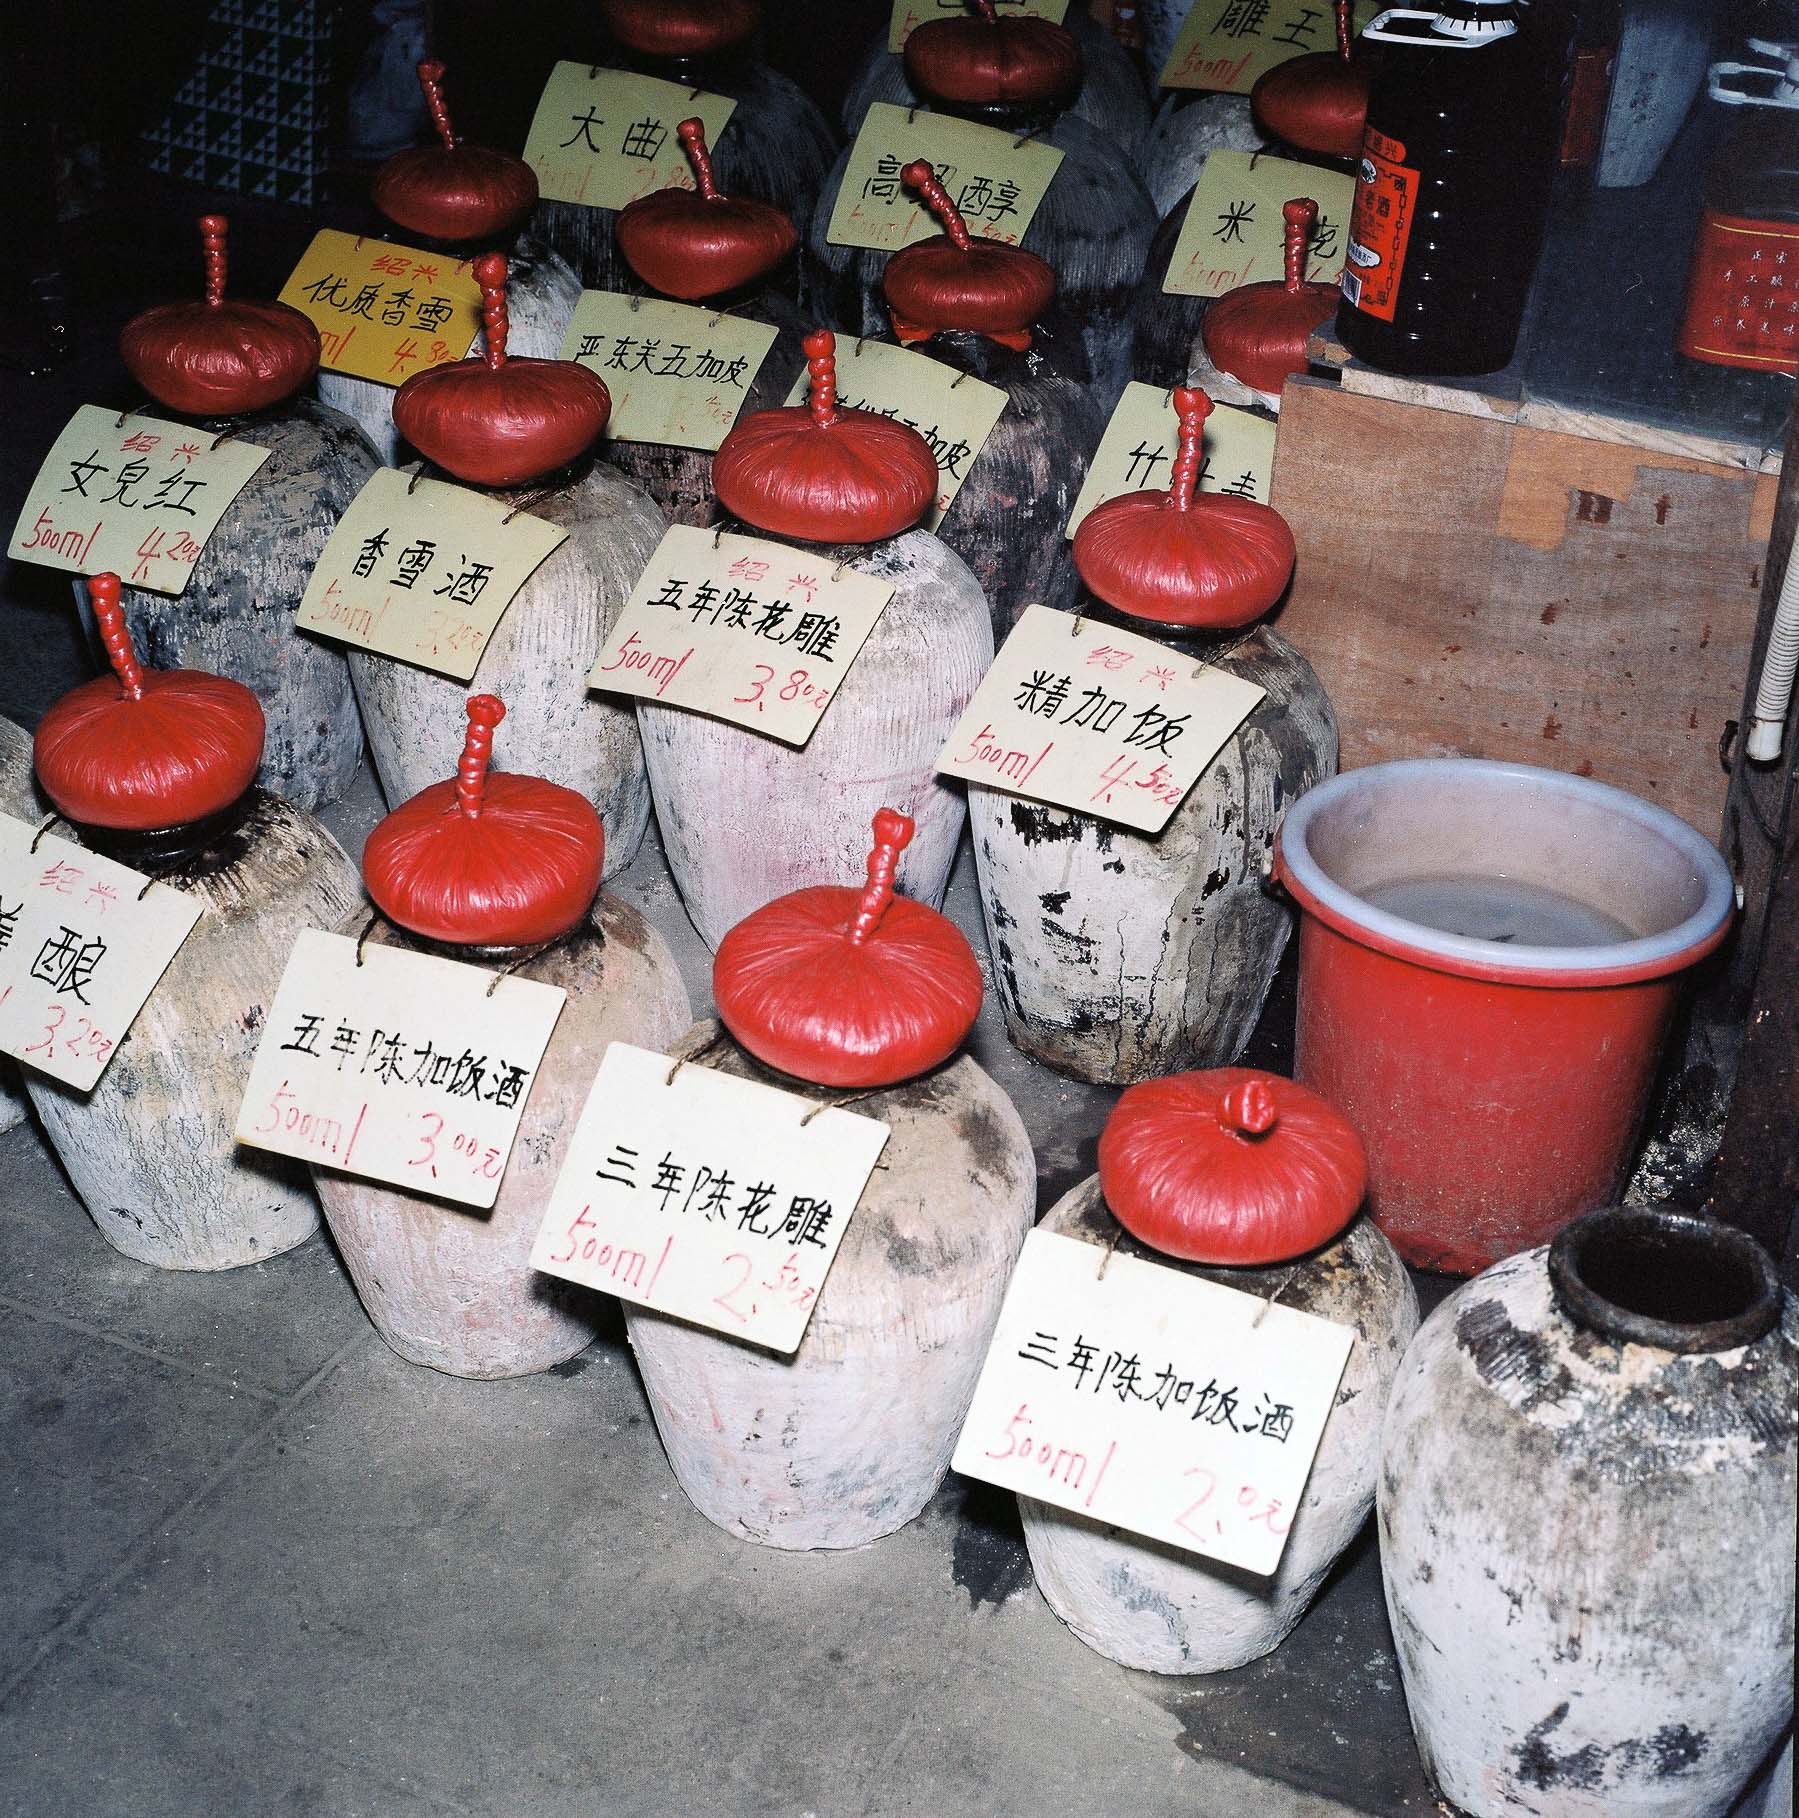 A collection of rice jars with red lids and chinese written labels. 